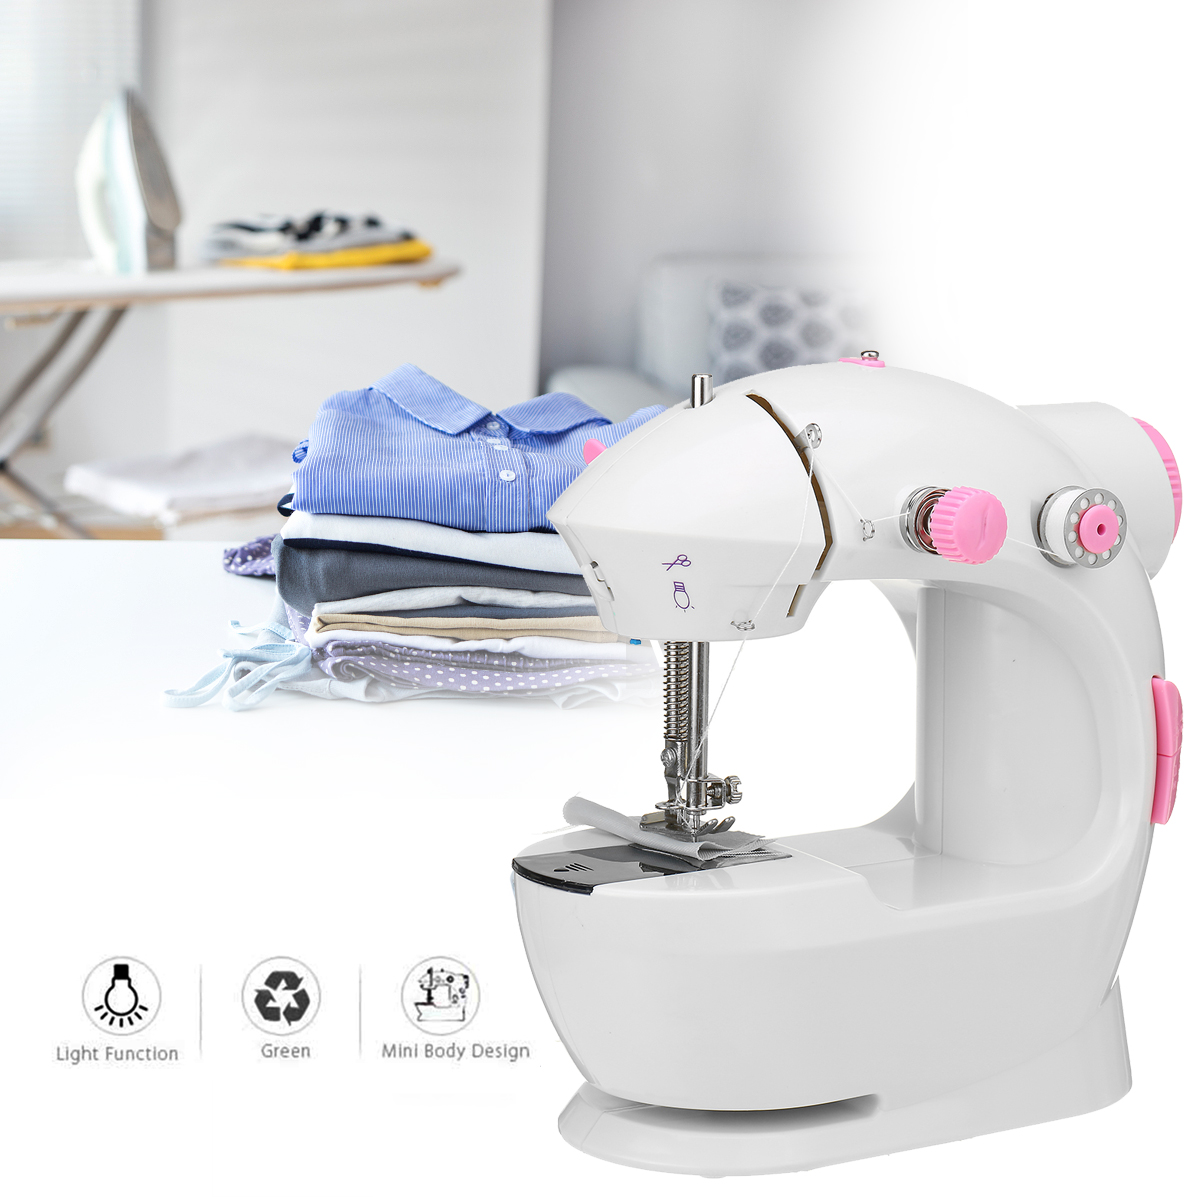 Household-Electric-Sewing-Machine-Mini-Portable-Speed-Adjustable-Sewing-Machine-1725564-3